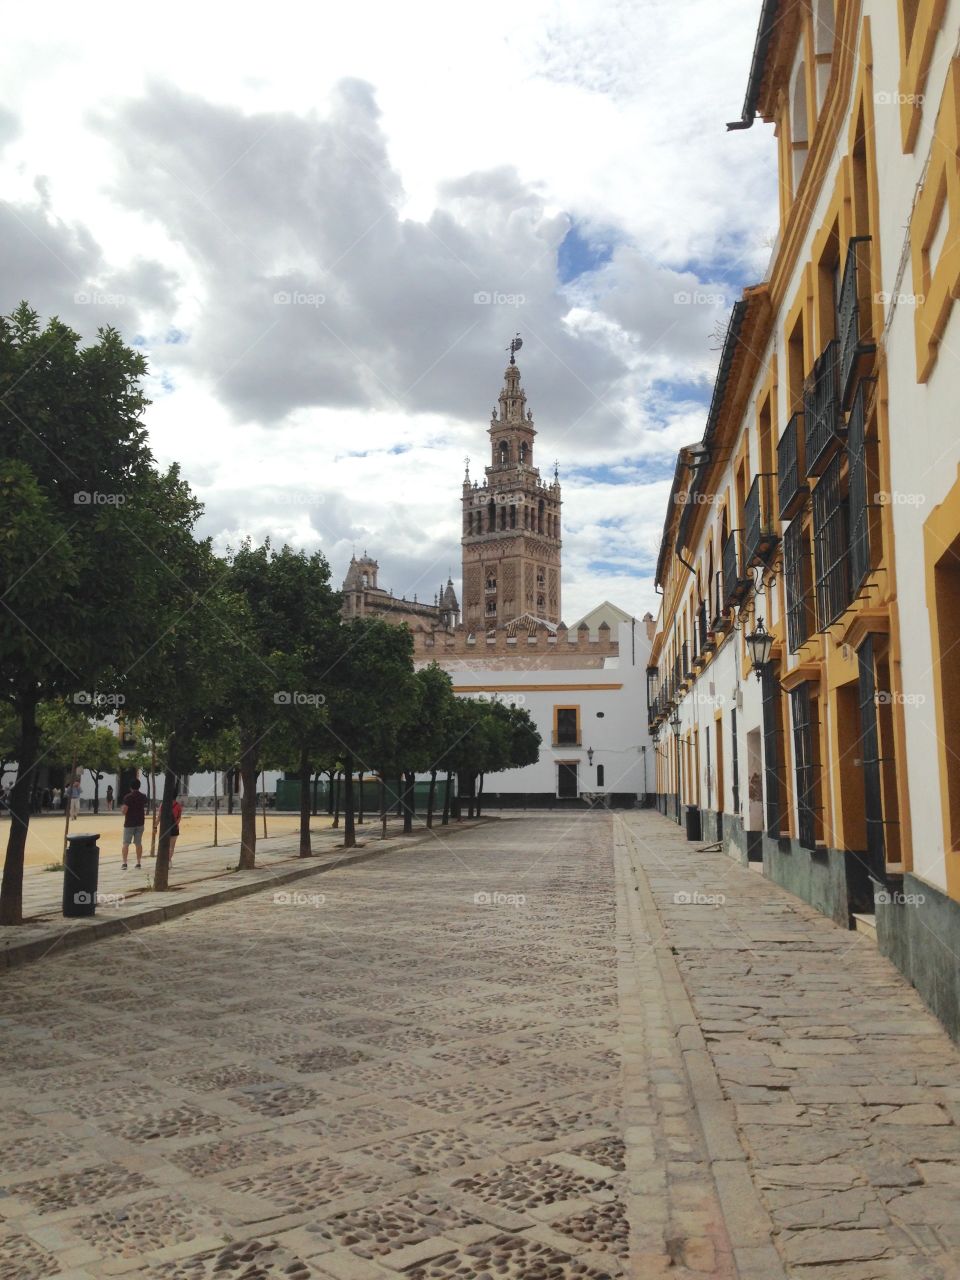 The bell tower of Seville Cathedral as seen from nearby Patio de Banderas